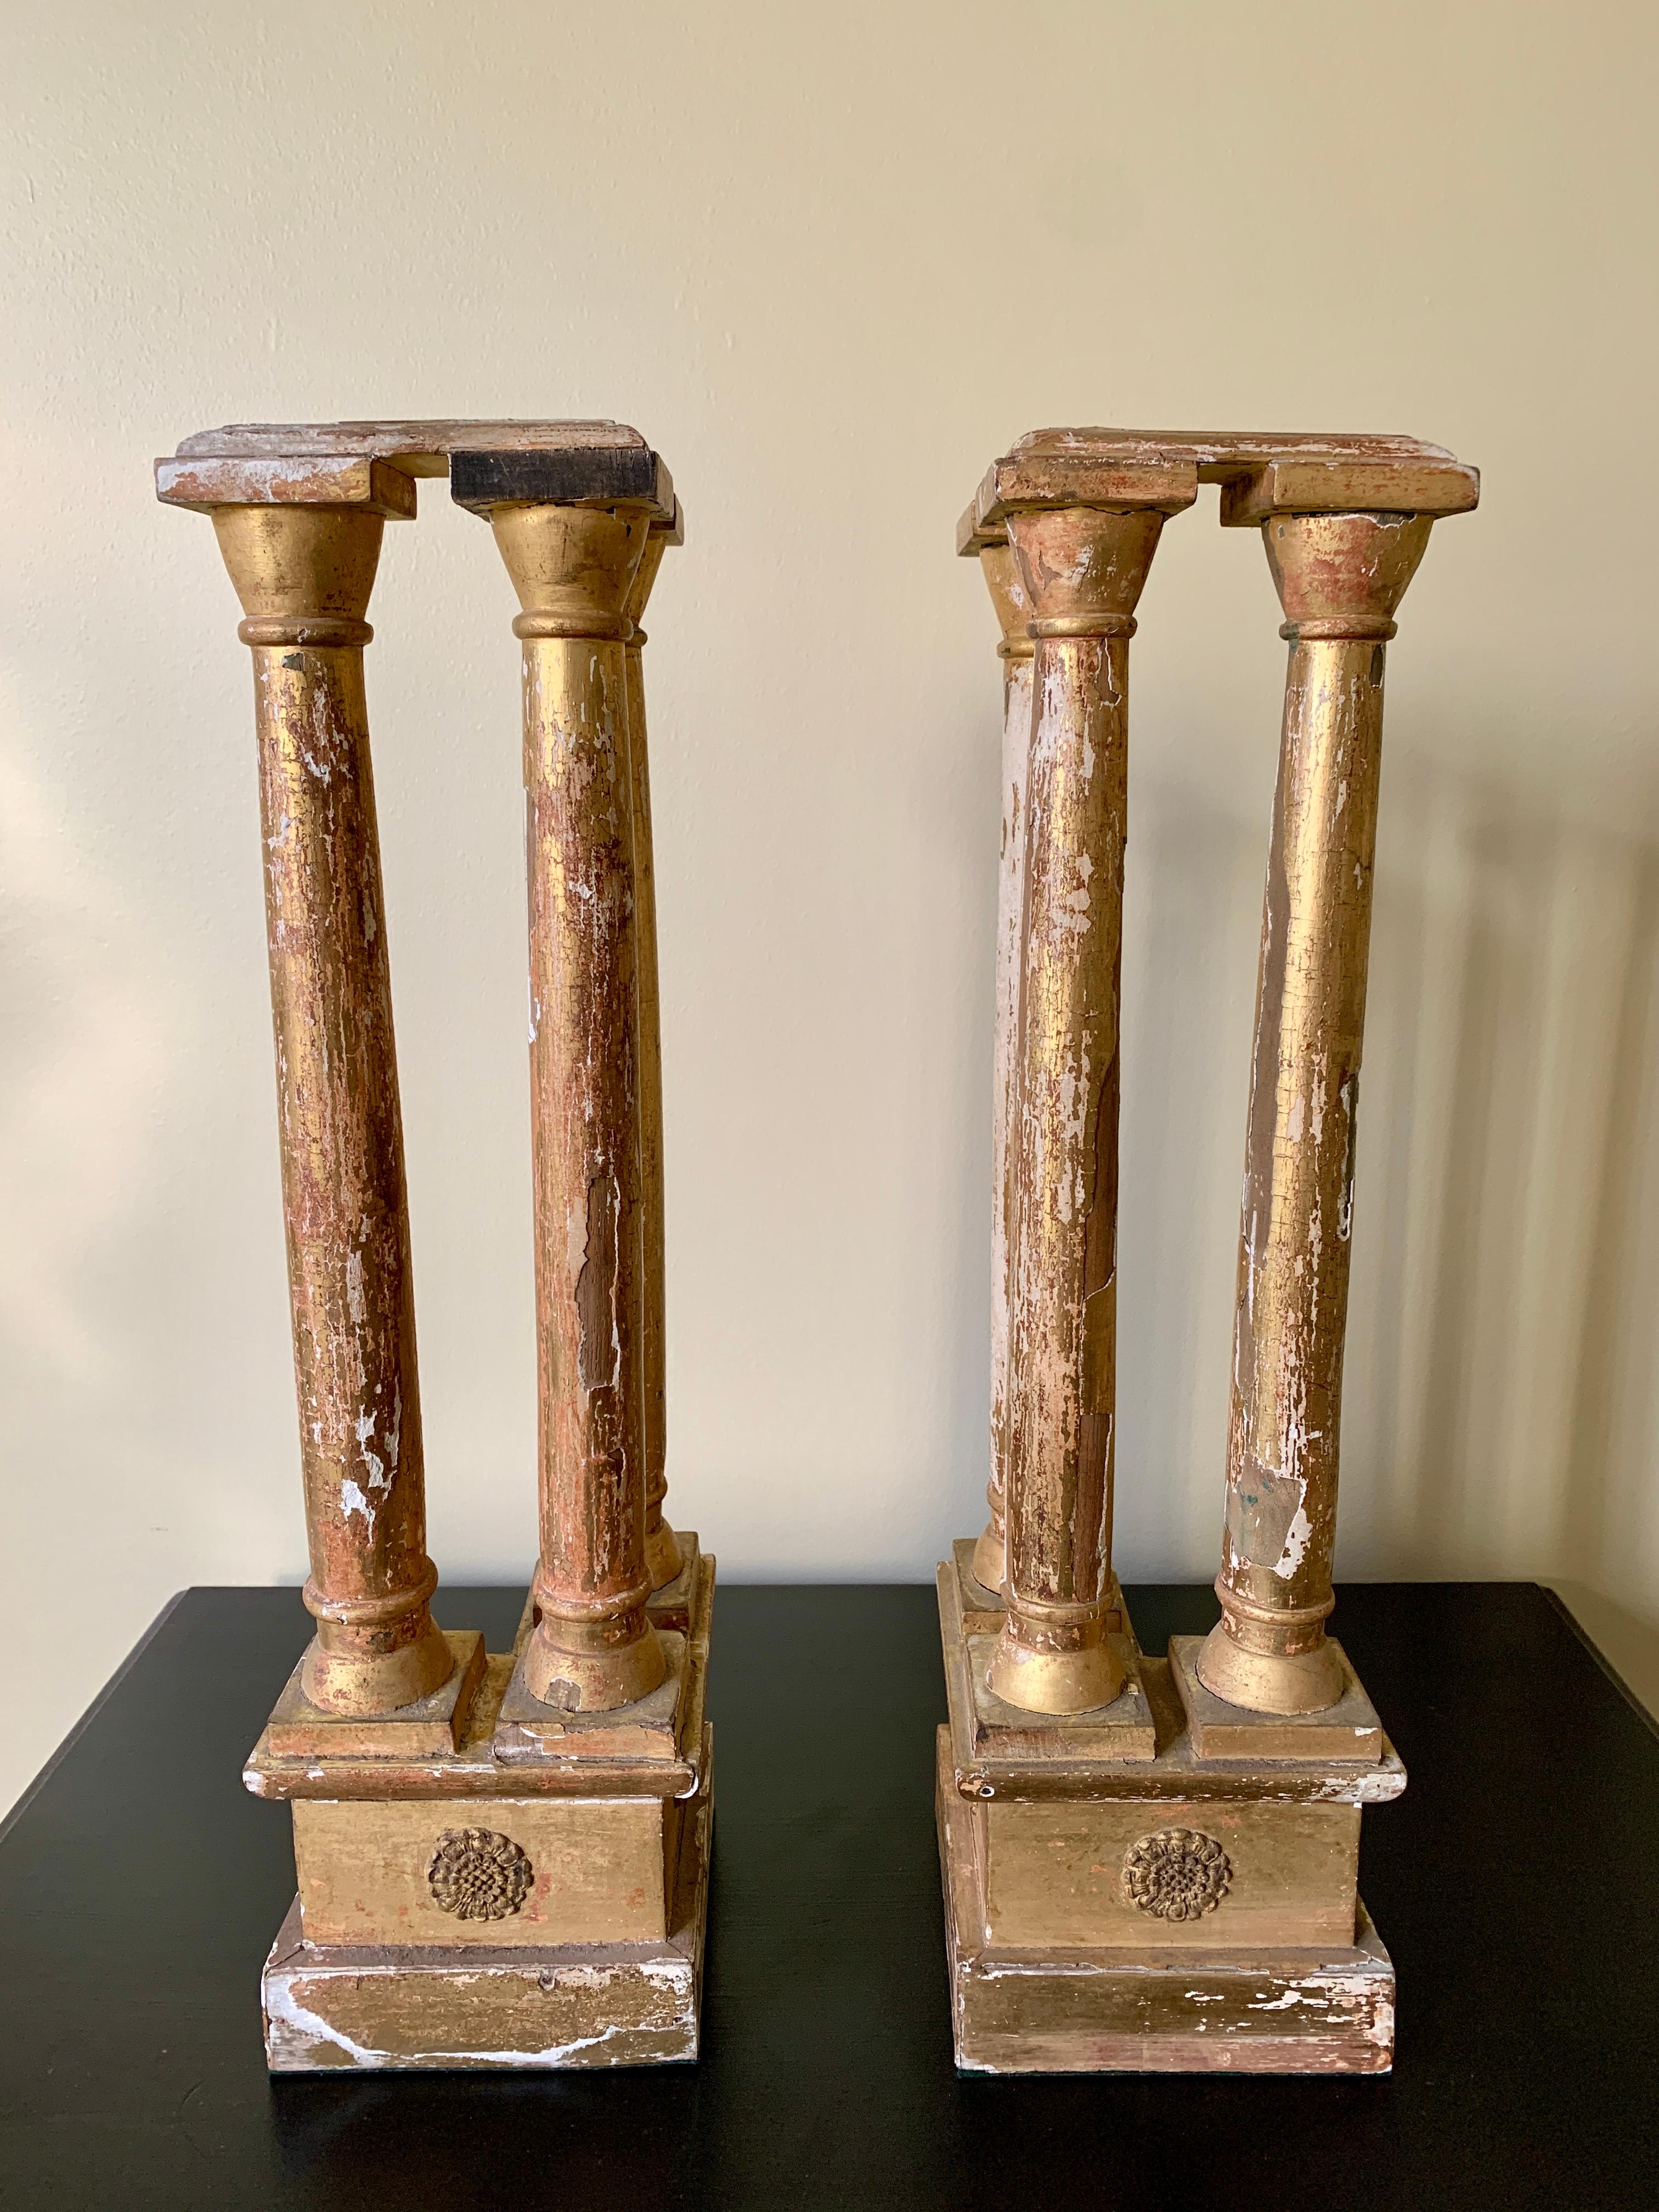 Antique Neoclassical Grand Tour Giltwood Architectural Columns, a Pair For Sale 5